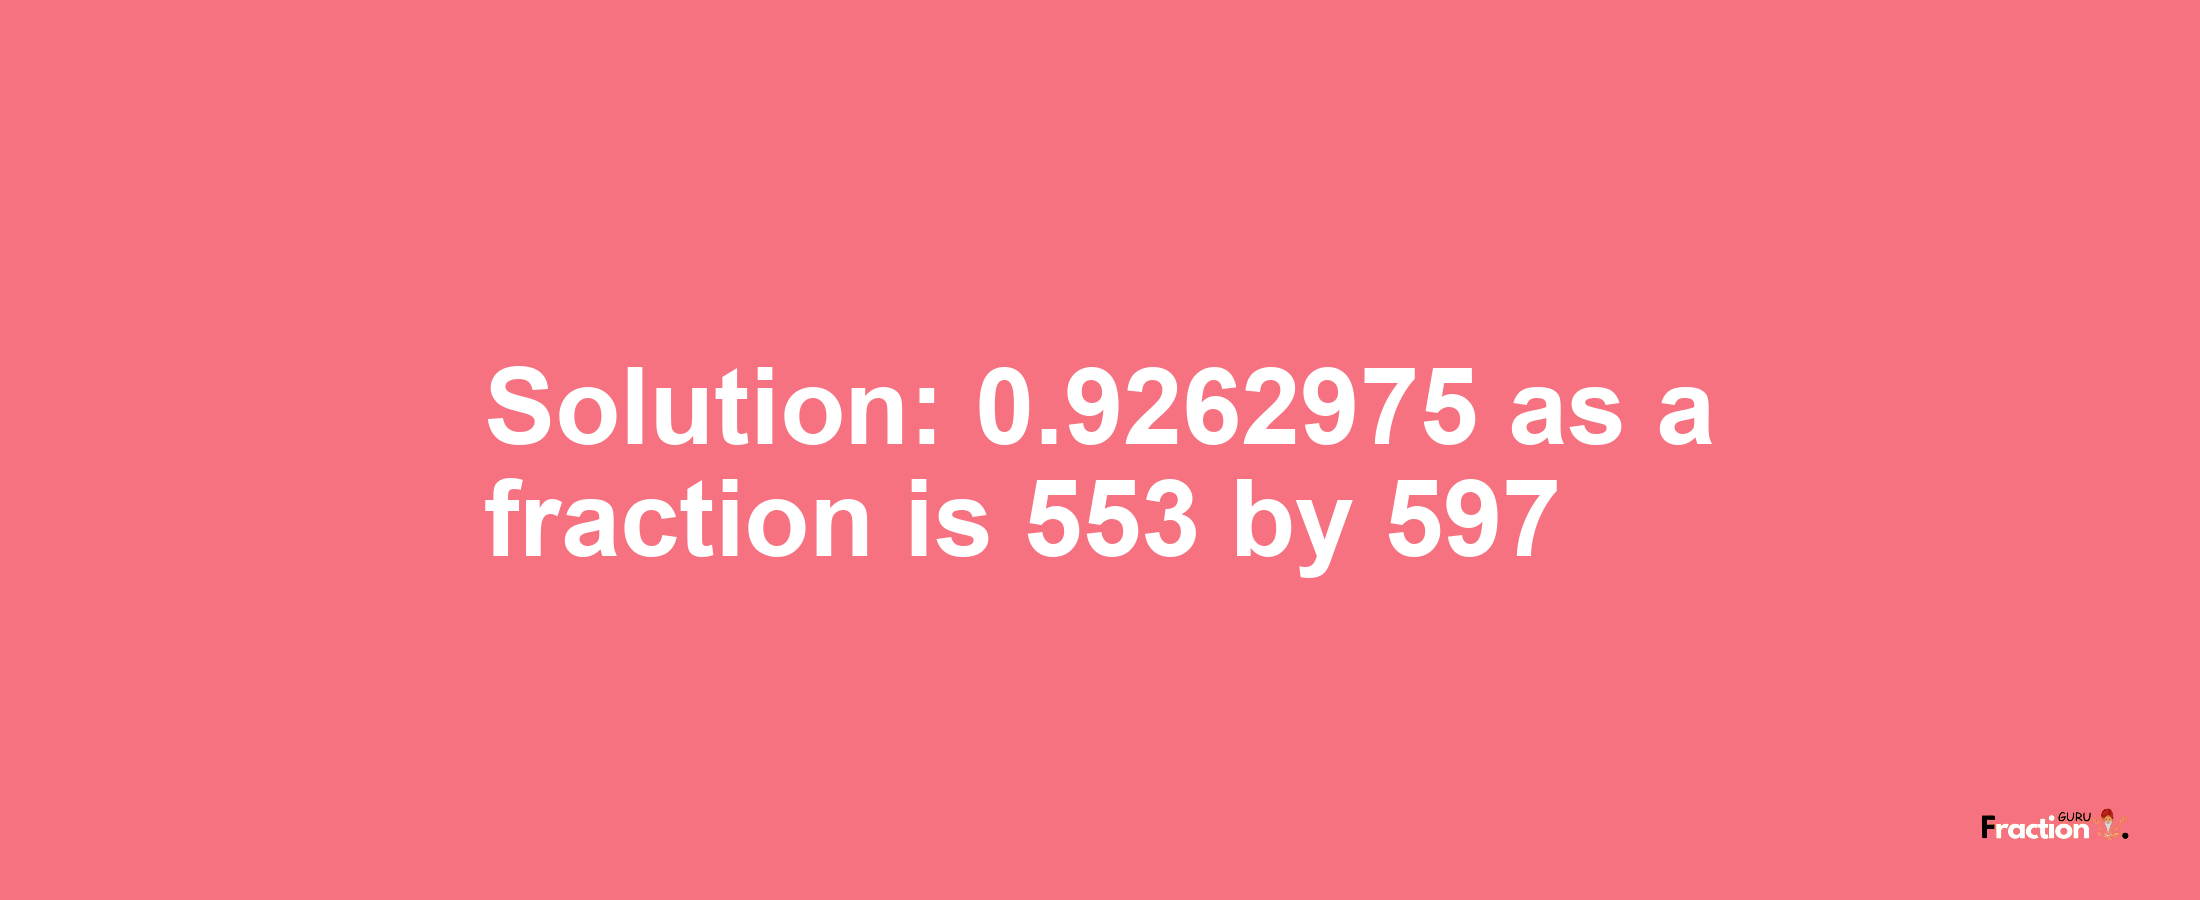 Solution:0.9262975 as a fraction is 553/597